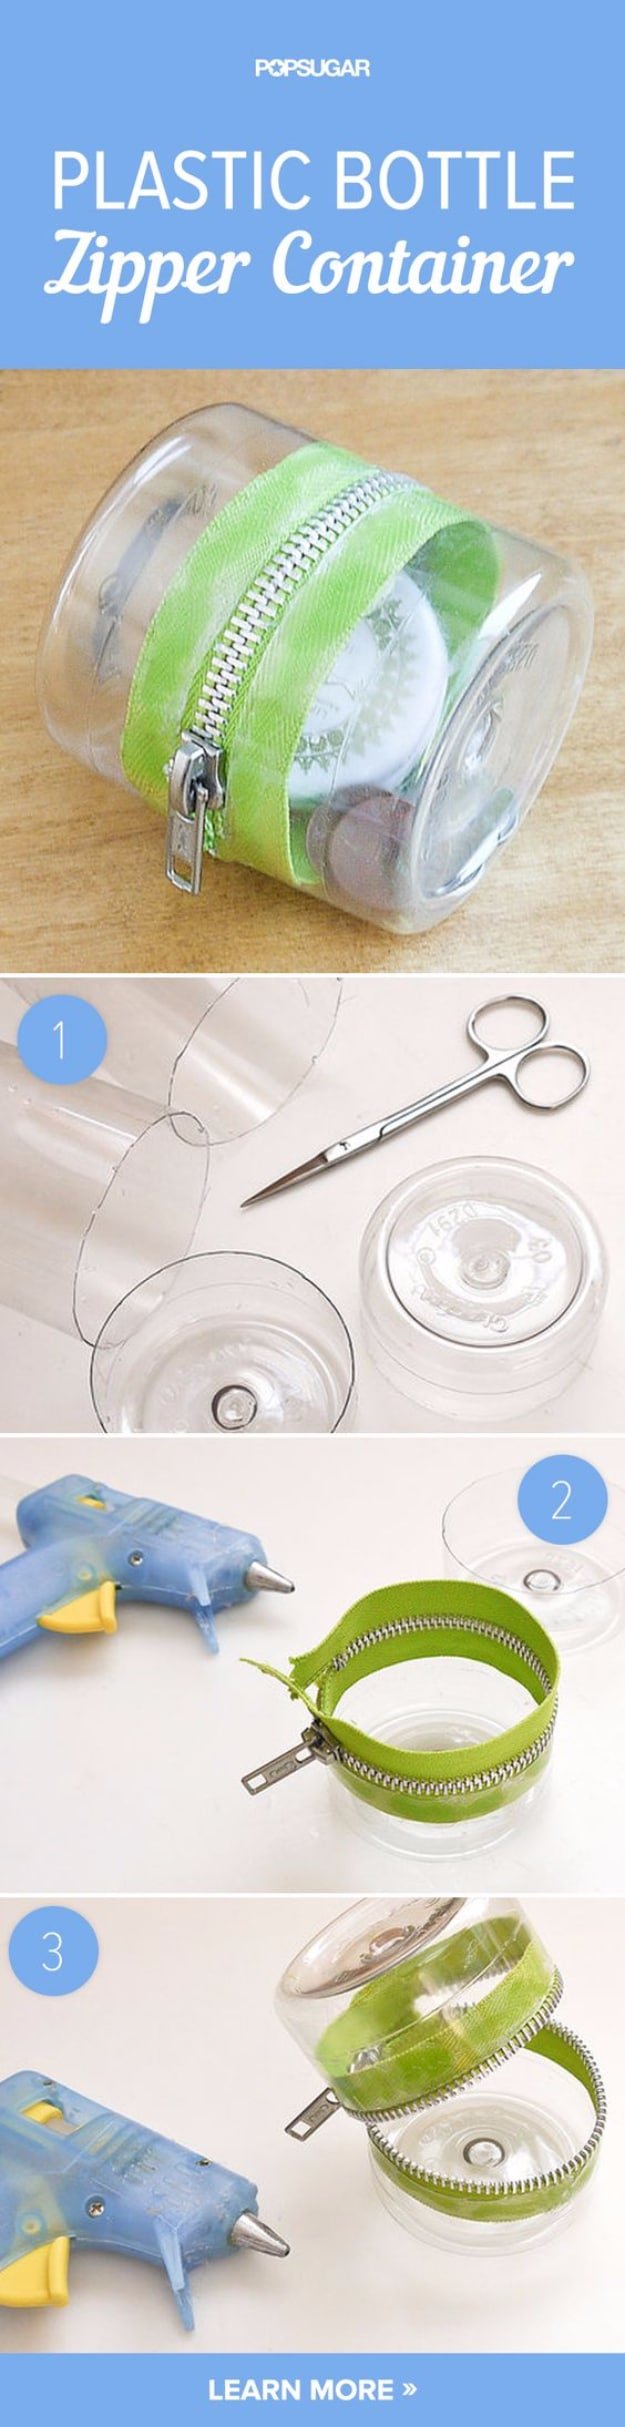 Cool DIY Projects Made With Plastic Bottles - Plastic Bottle Zipper Container - Best Easy Crafts and DIY Ideas Made With A Recycled Plastic Bottle - Jewlery, Home Decor, Planters, Craft Project Tutorials - Cheap Ways to Decorate and Creative DIY Gifts for Christmas Holidays - Fun Projects for Adults, Teens and Kids 